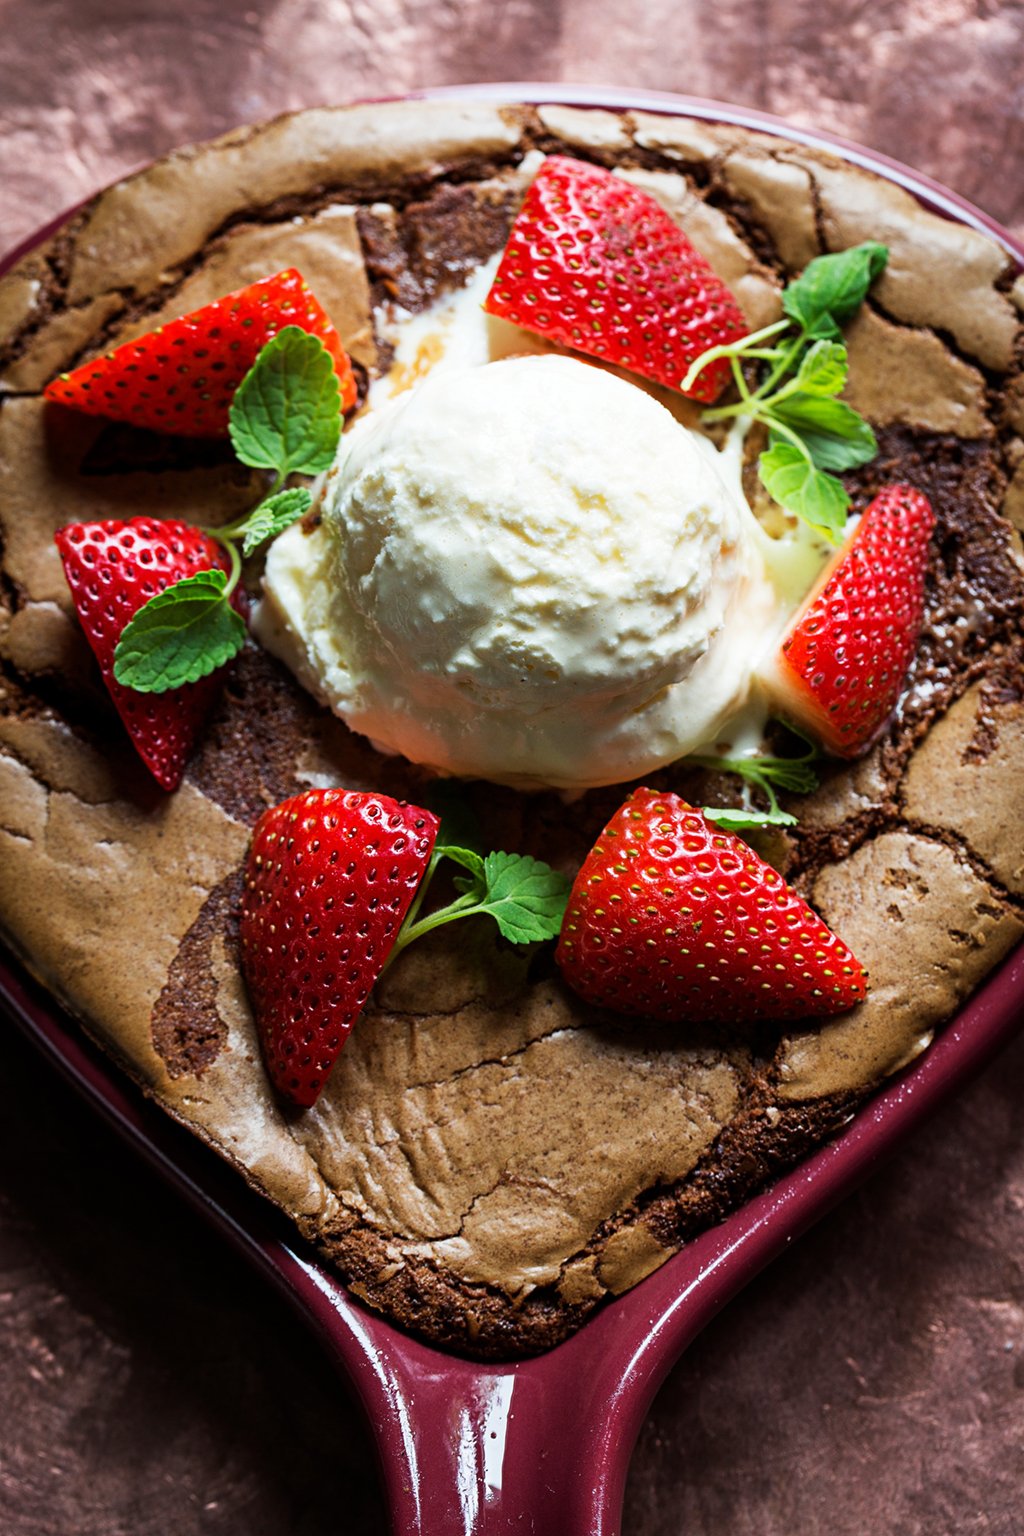 Helen's skillet brownie with vanilla ice cream and strawberries. Photograph by Scott Suchman.